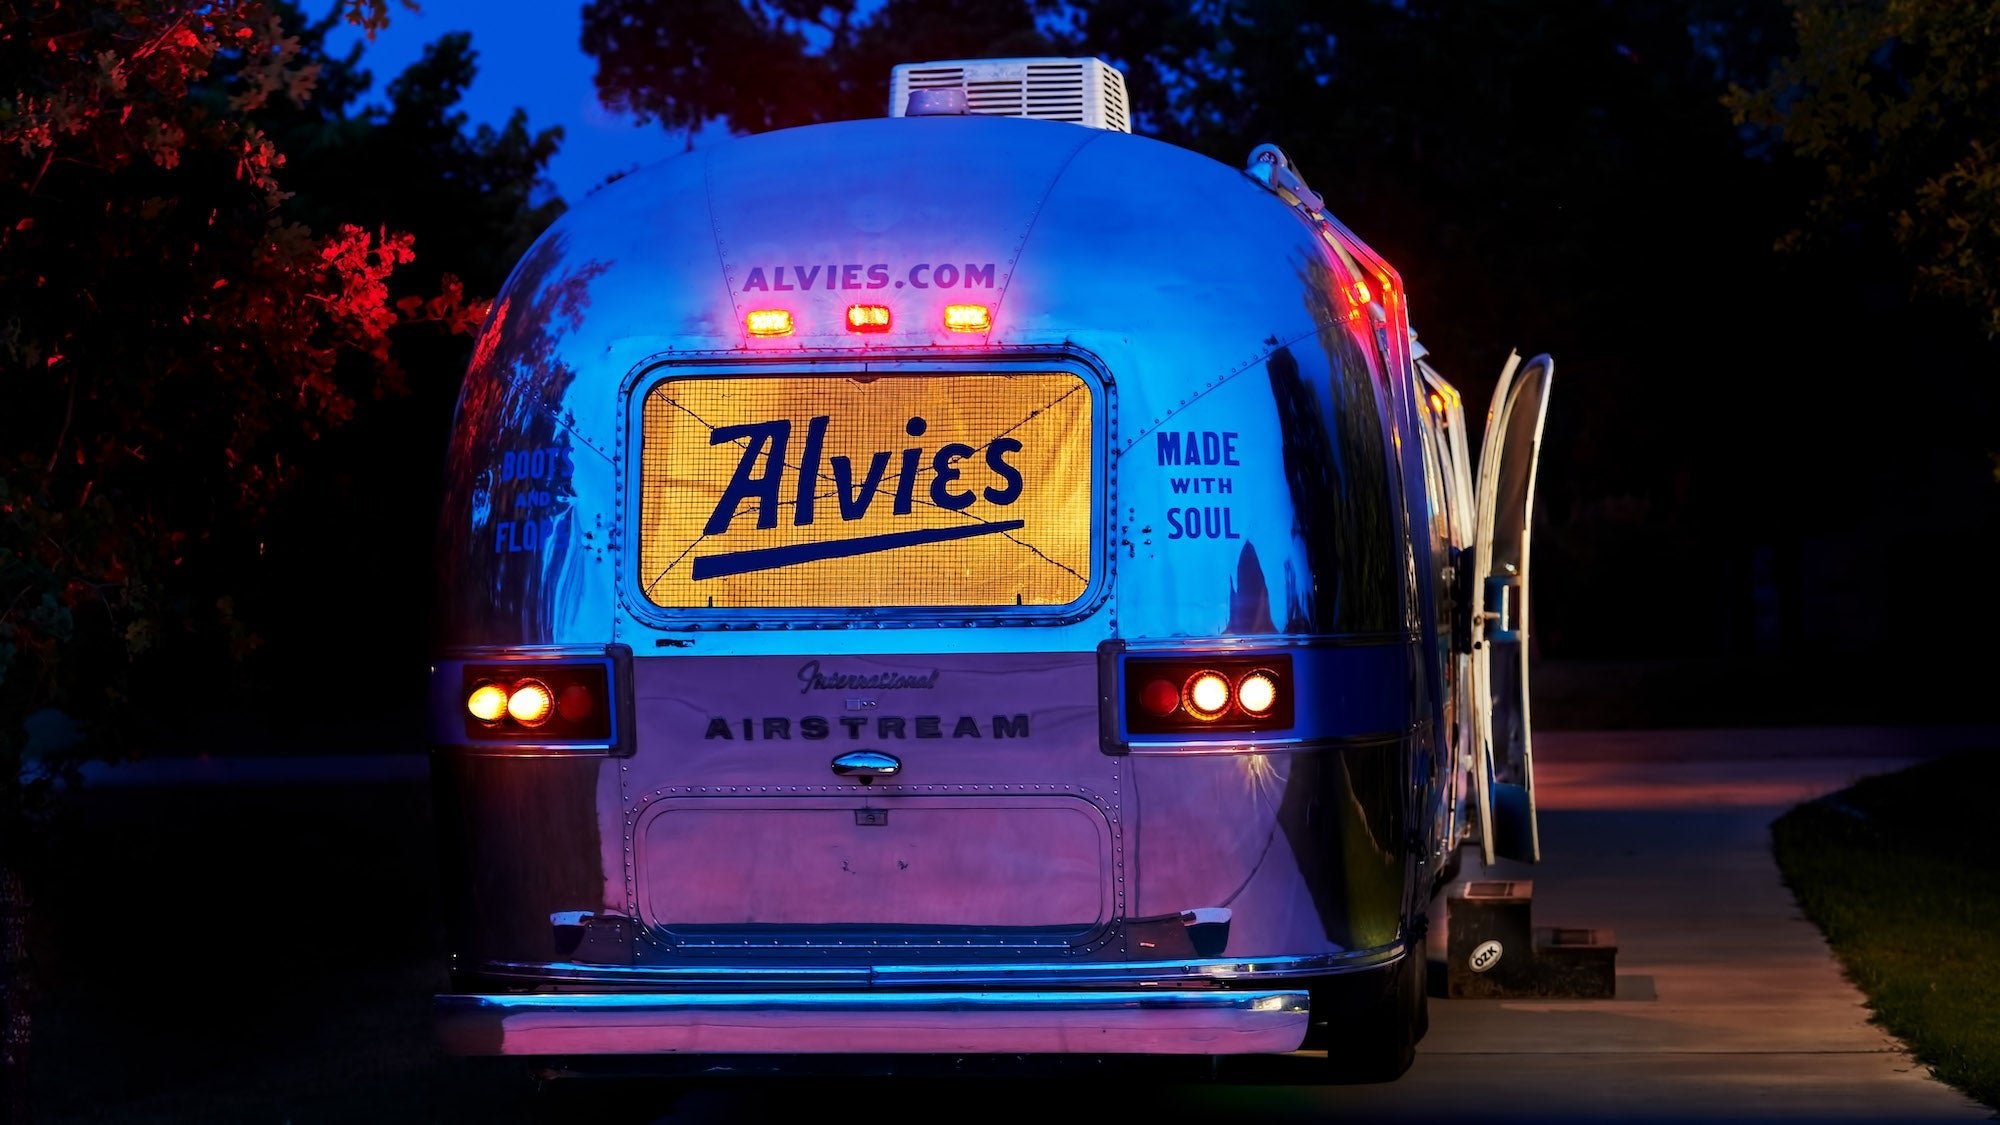 From Airstream to Ecommerce: The Alvies Customer Experience - Alvies